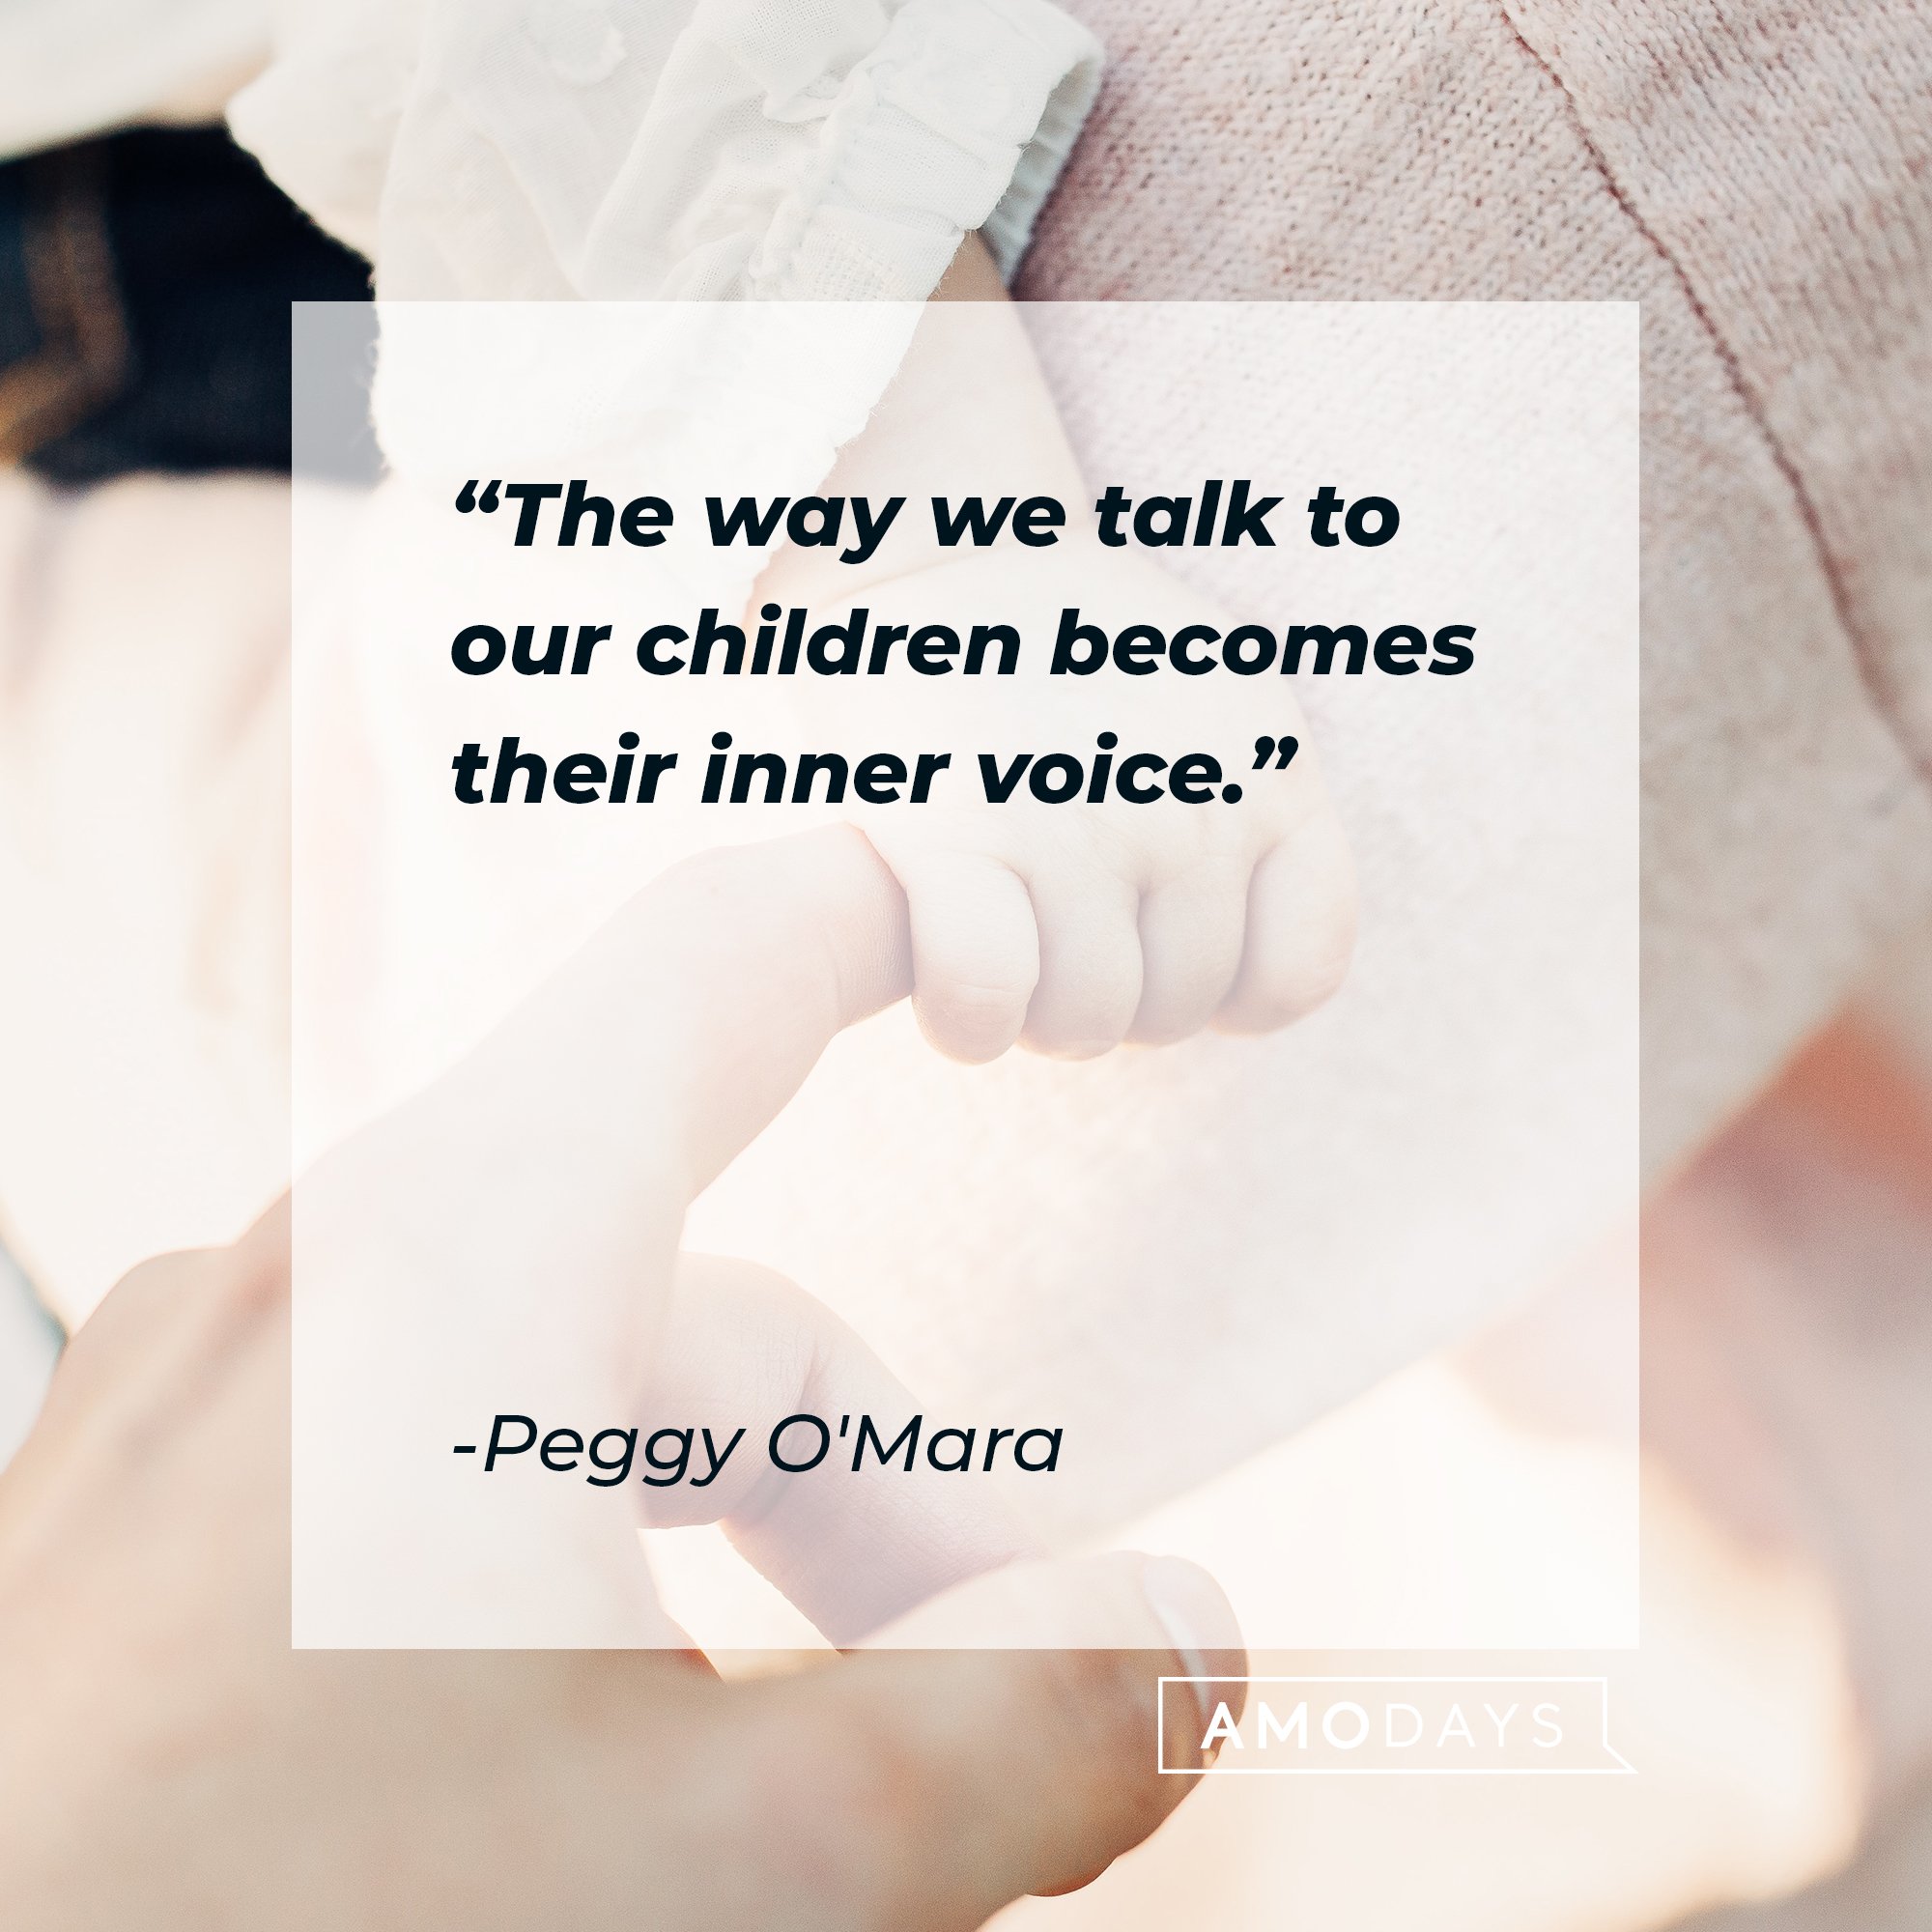 Peggy O'Mara's quote: "The way we talk to our children becomes their inner voice." | Image: AmoDays